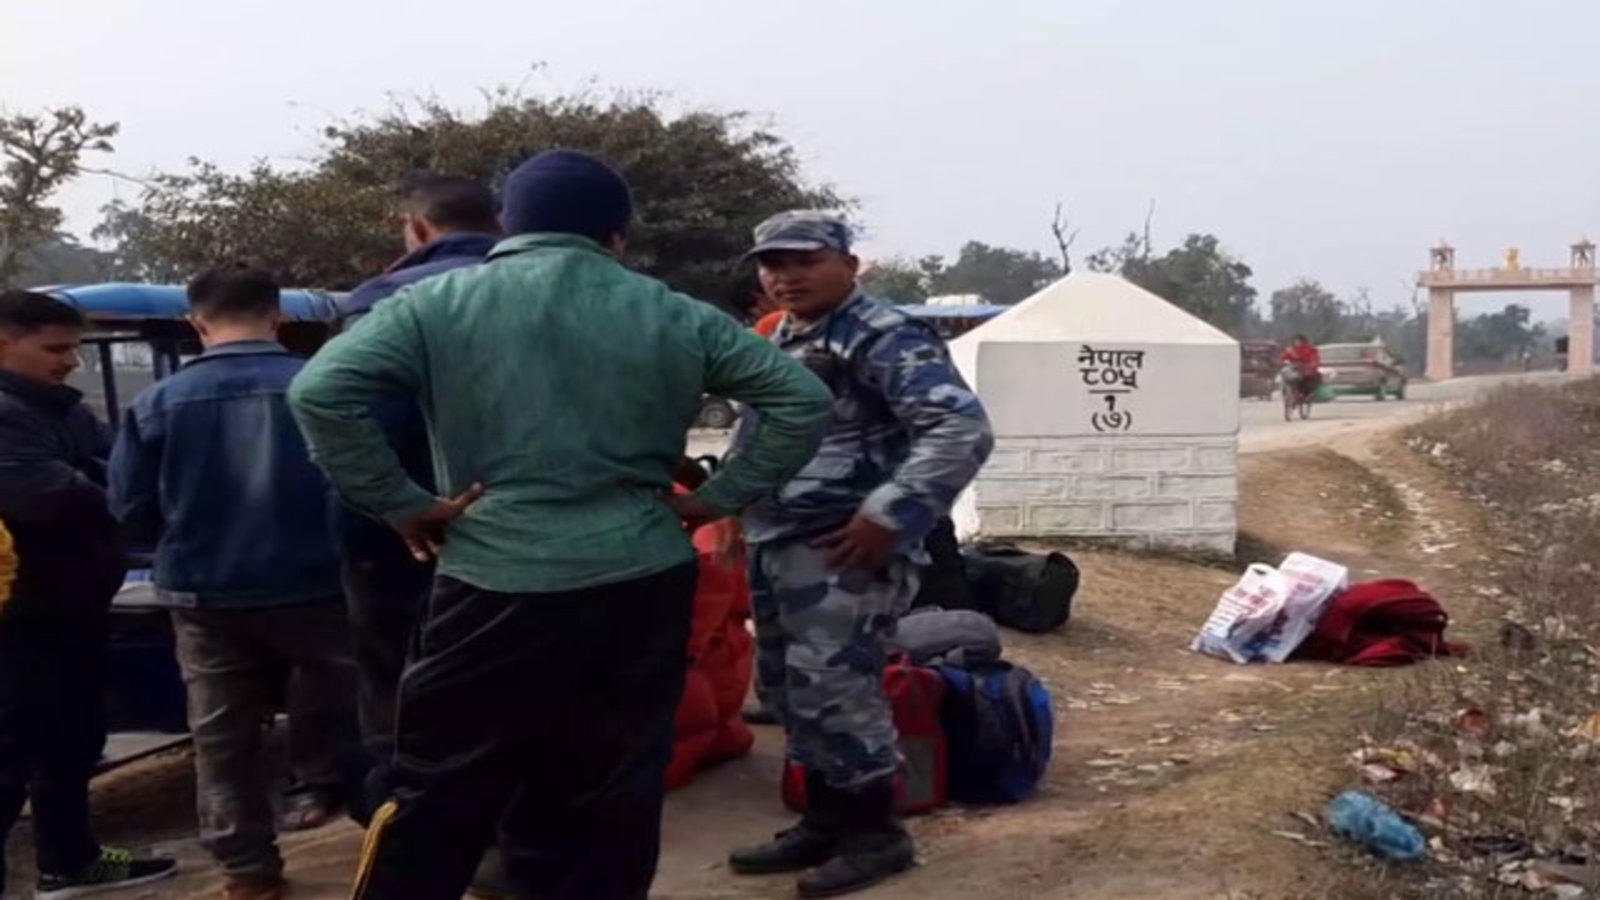 Nepal commits major act, one Indian killed and 4 injured in firing